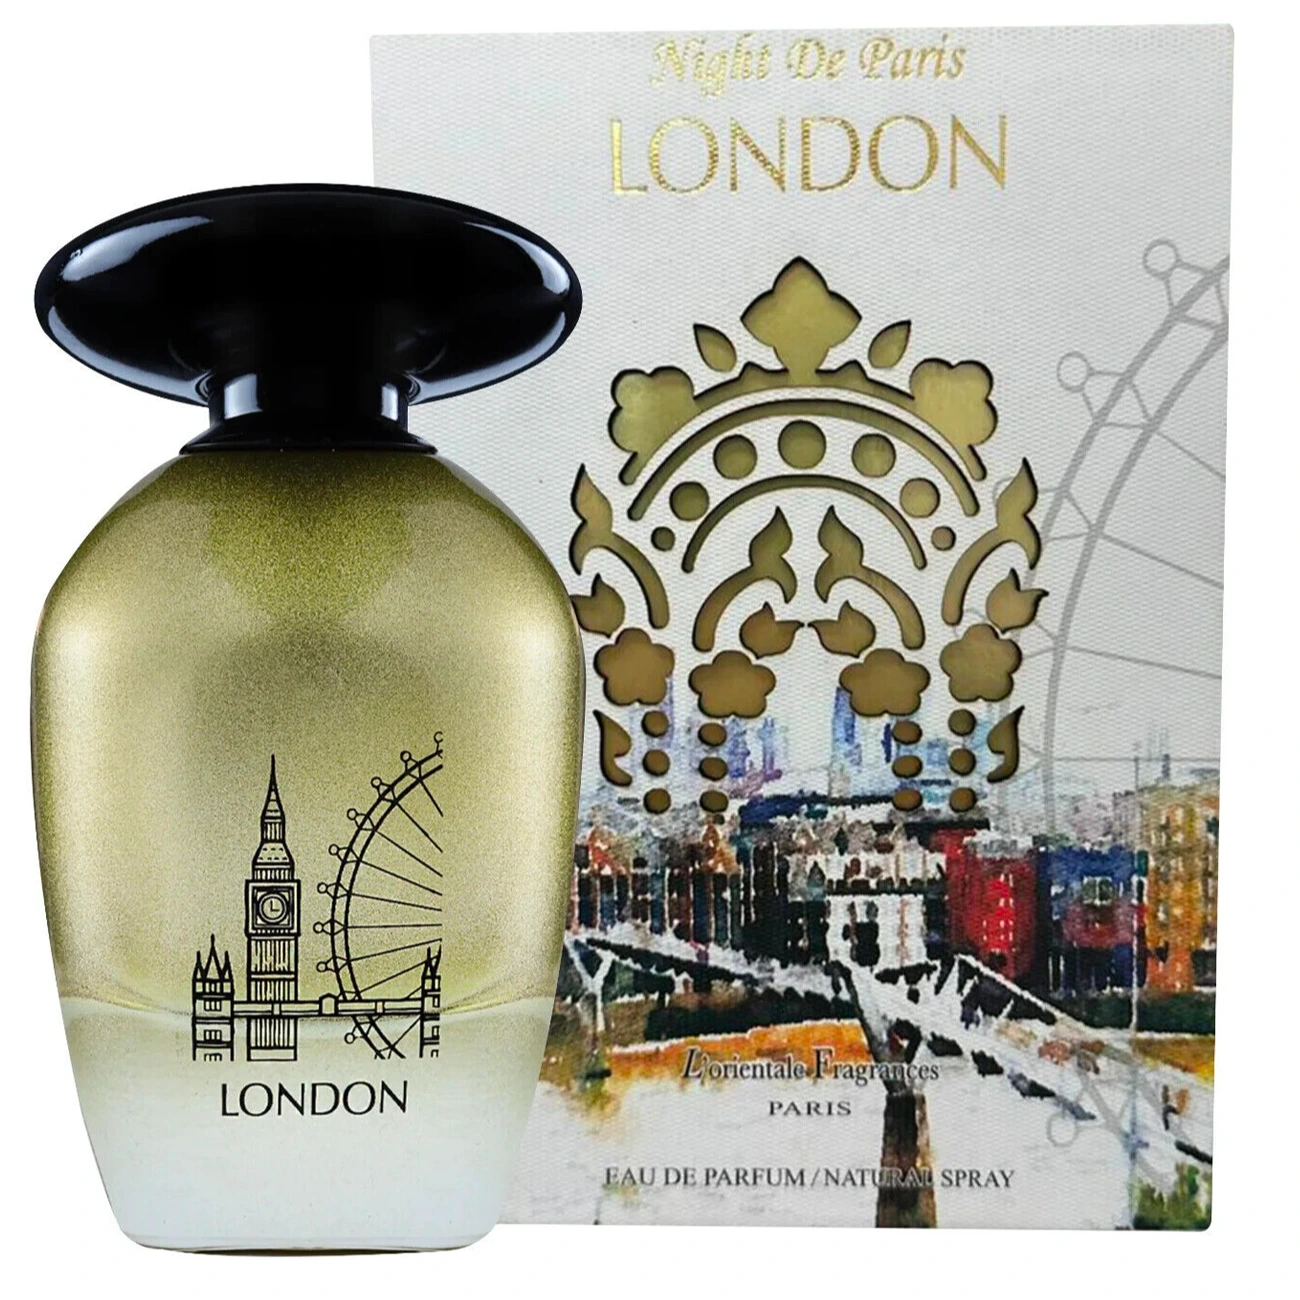 <p data-mce-fragment="1">Discover the rejuvenating scent of Night De Paris London, a unique blend of spicy and fruity notes that bring a glamorous feel to your day and night. Perfect for both men and women, the amber fragrance is made with Peach, Orange, Cardamom, Jasmine and more, giving you an exciting and energizing scent that stands out. Experience your new signature aroma with Night De Paris London!</p>